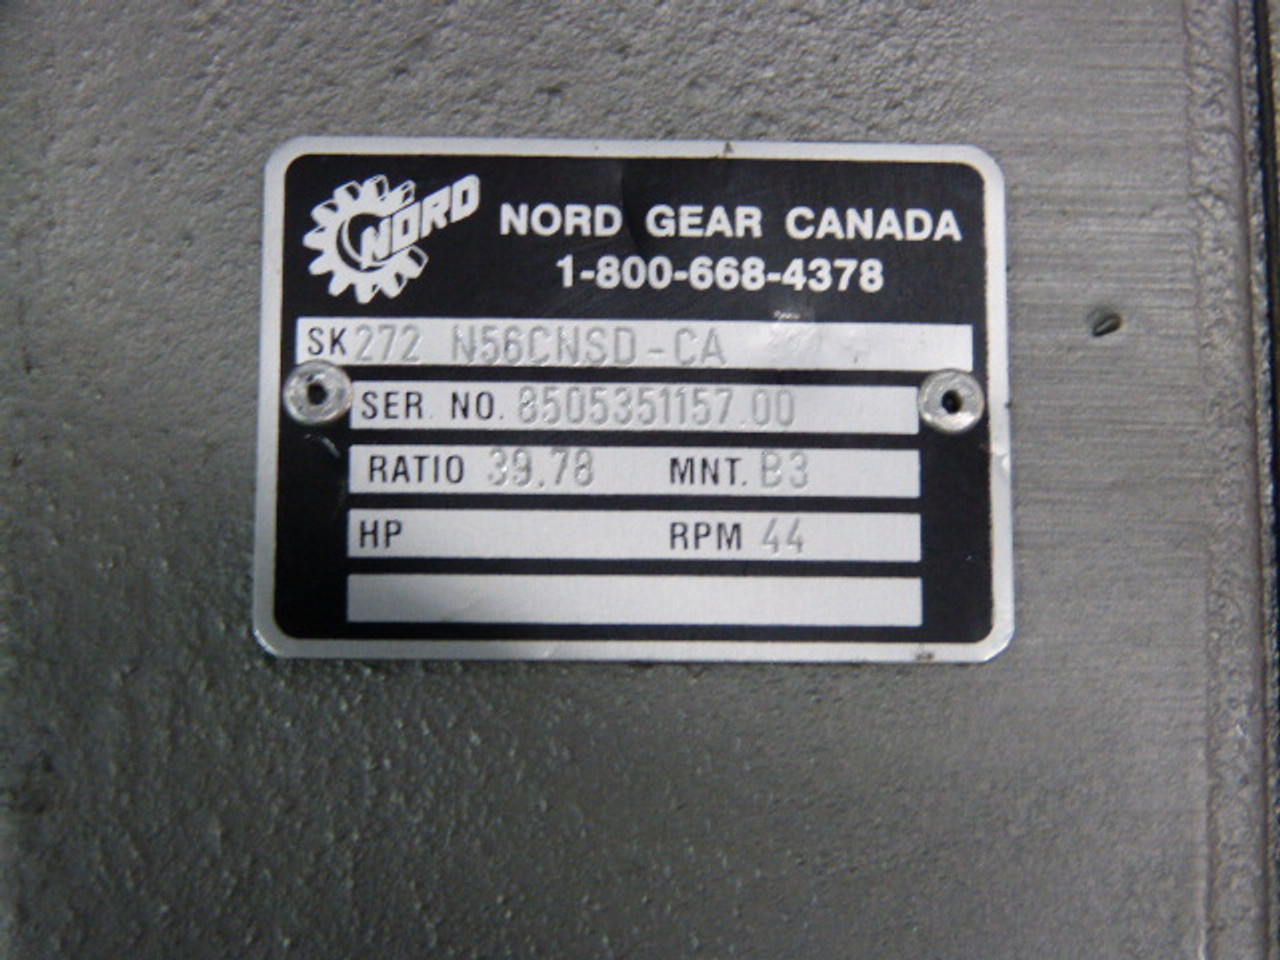 Nord SK272-N56CNSD-CA Gearbox 39.78 Ratio 44RPM ! NOP !